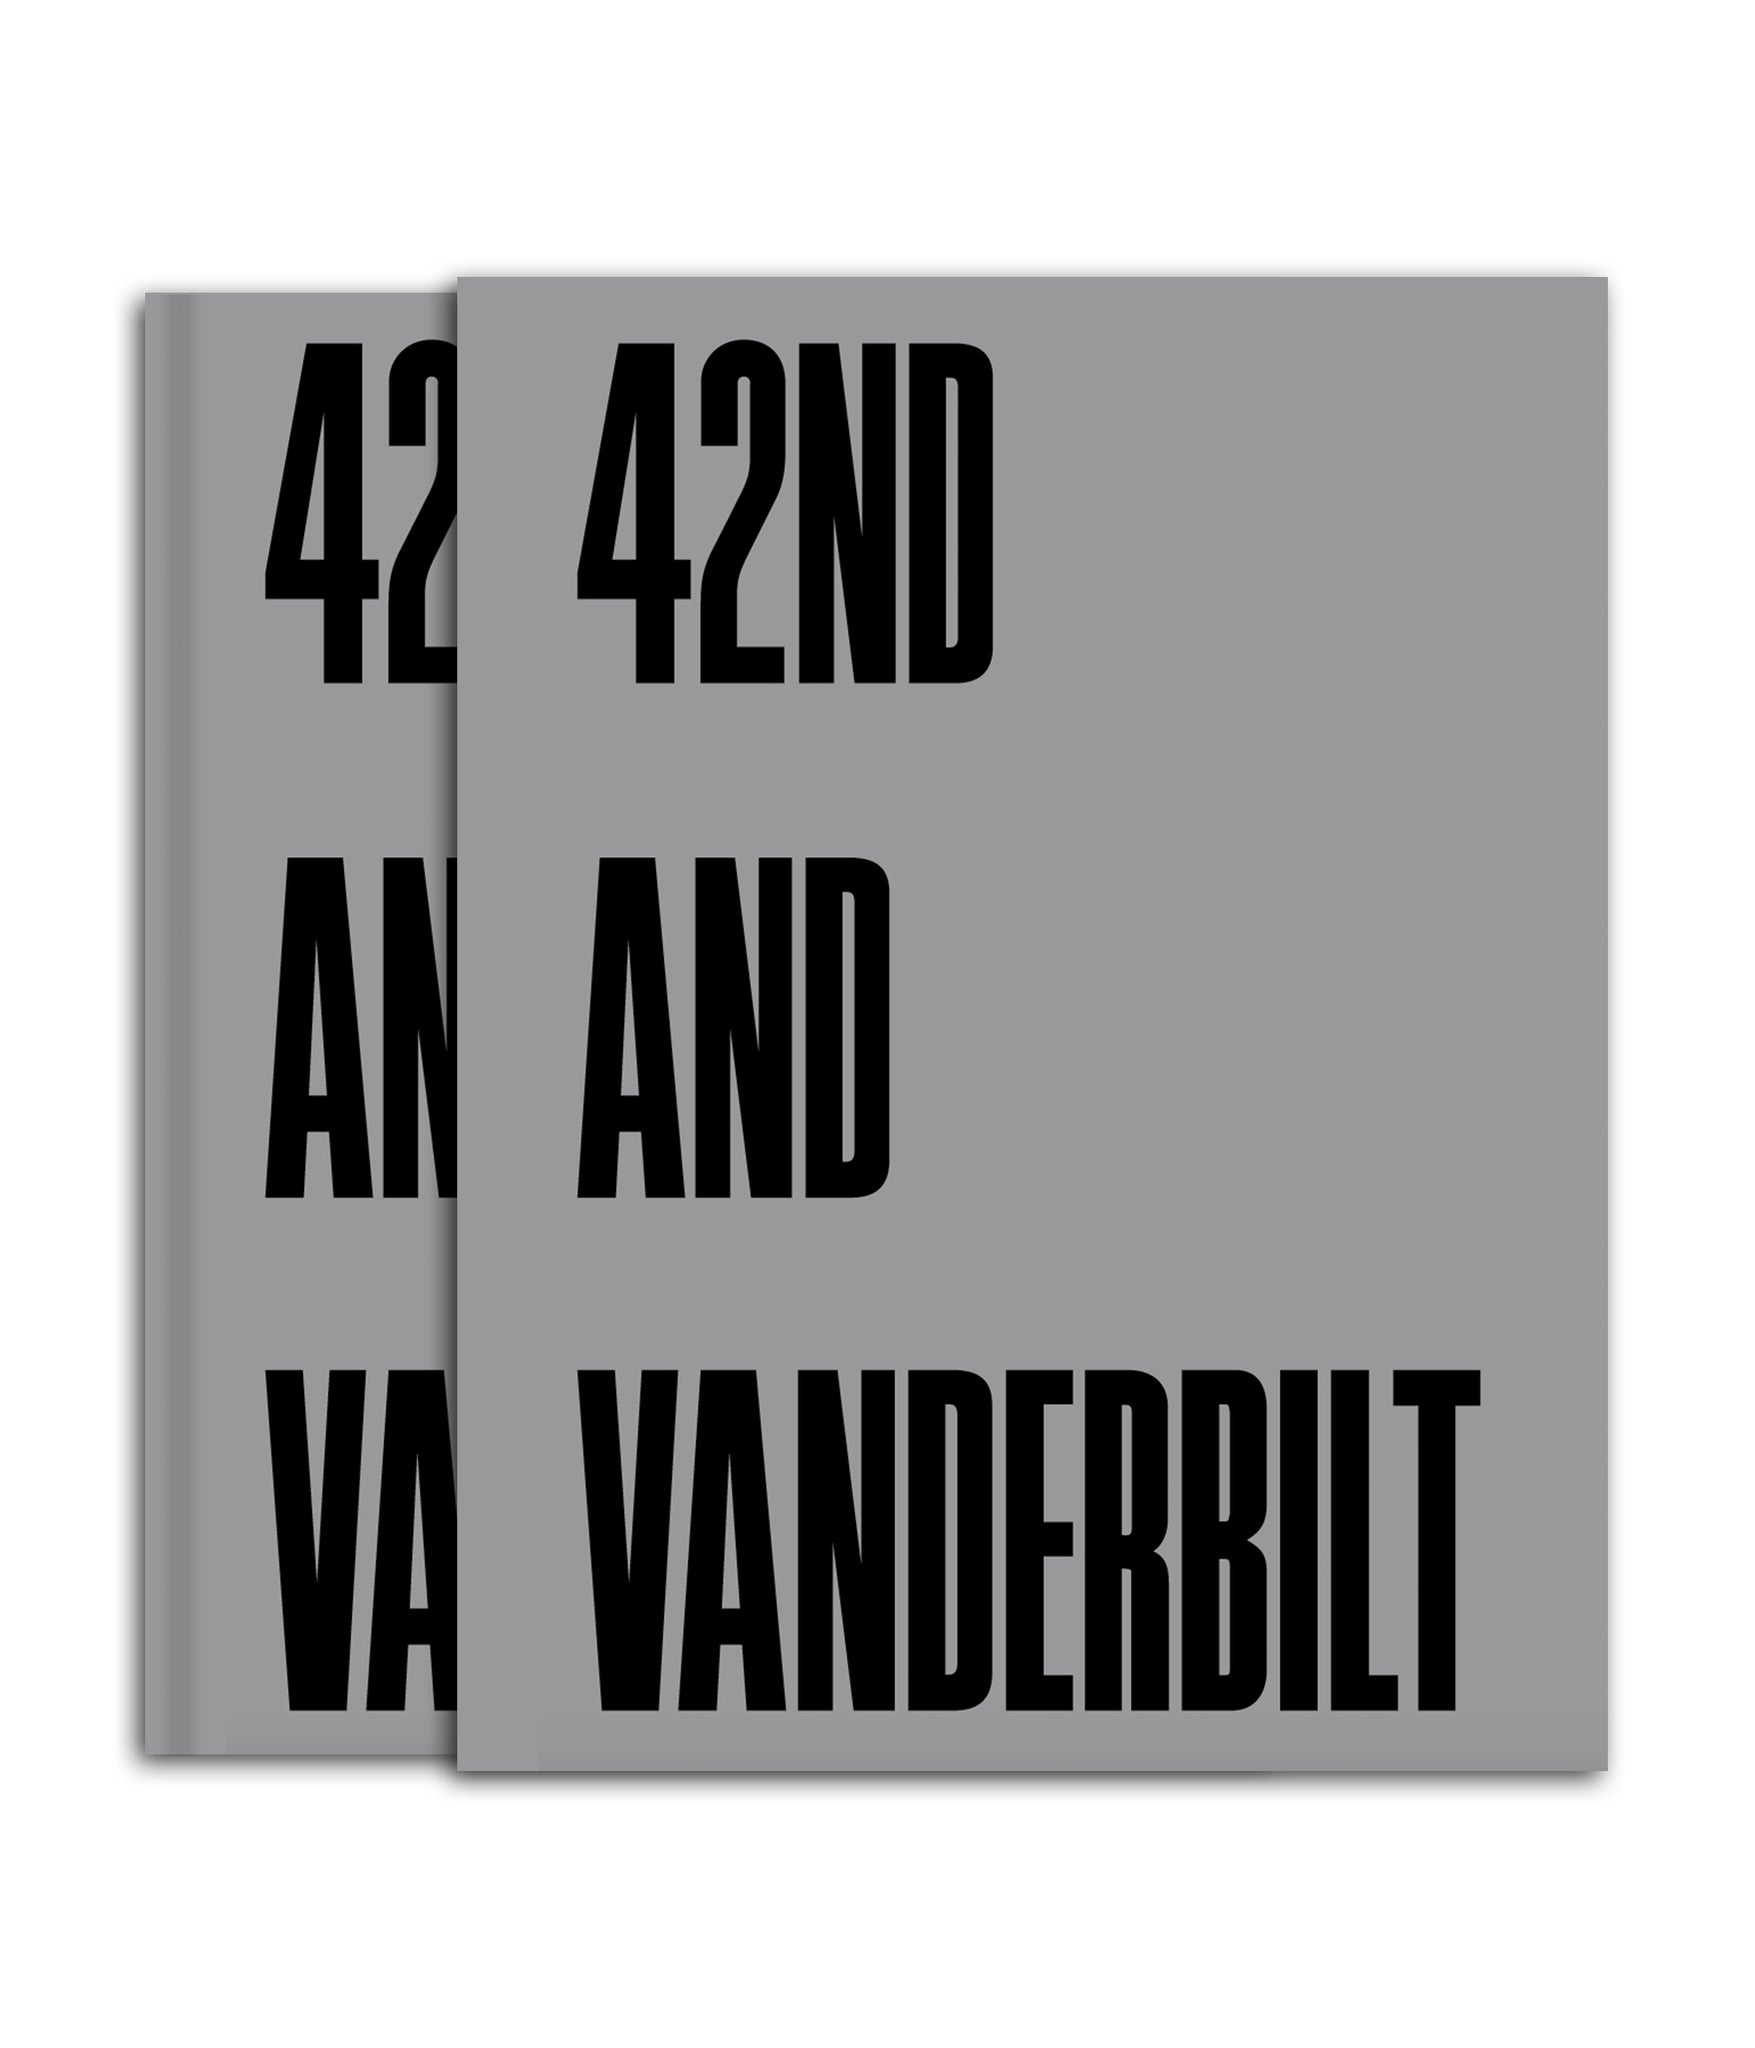 42nd and Vanderbilt - Special Edition Slipcase with Prints